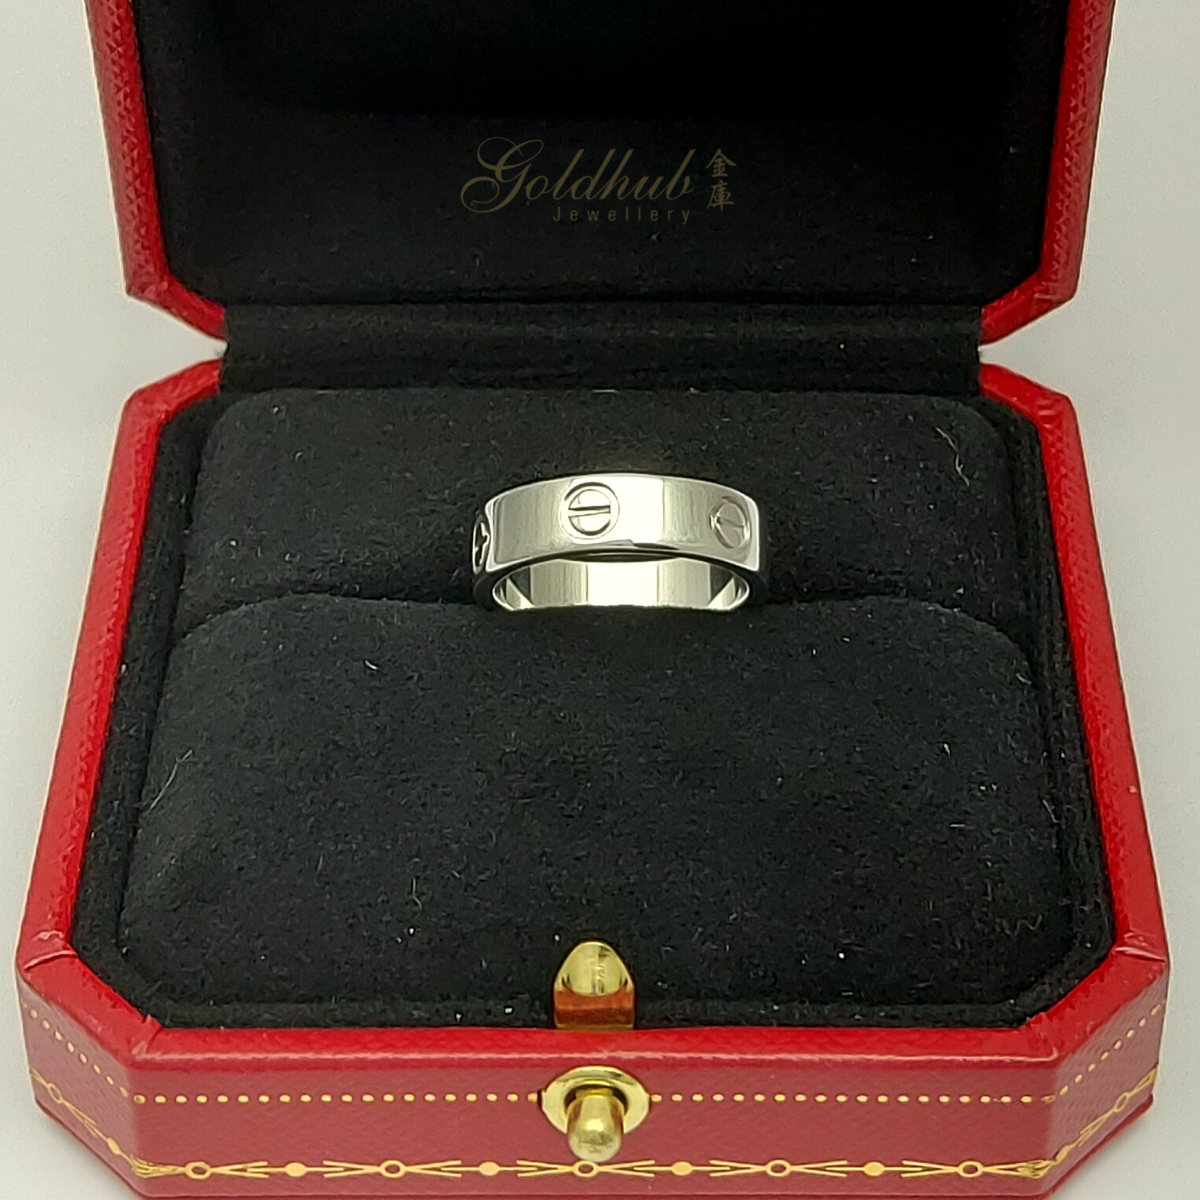 [RELOCATION SALES] PT950 Pre-loved Cartier Love Ring in Platinum